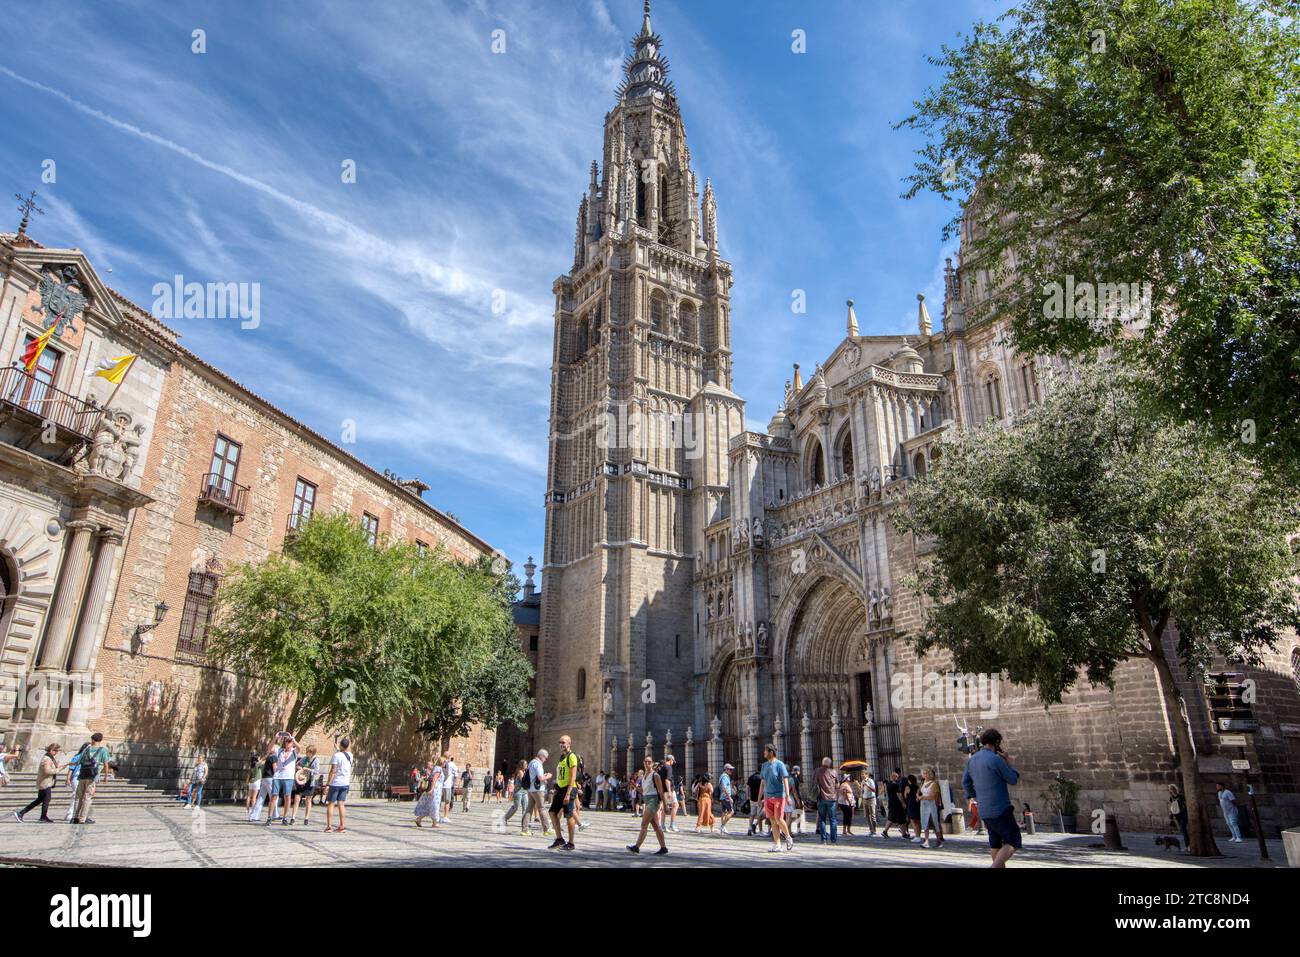 Toledo, Spain - August 29, 2023: The 13th century Primatial Cathedral of Saint Mary of Toledo is a popular tourist attraction in historic Toledo, Spai Stock Photo